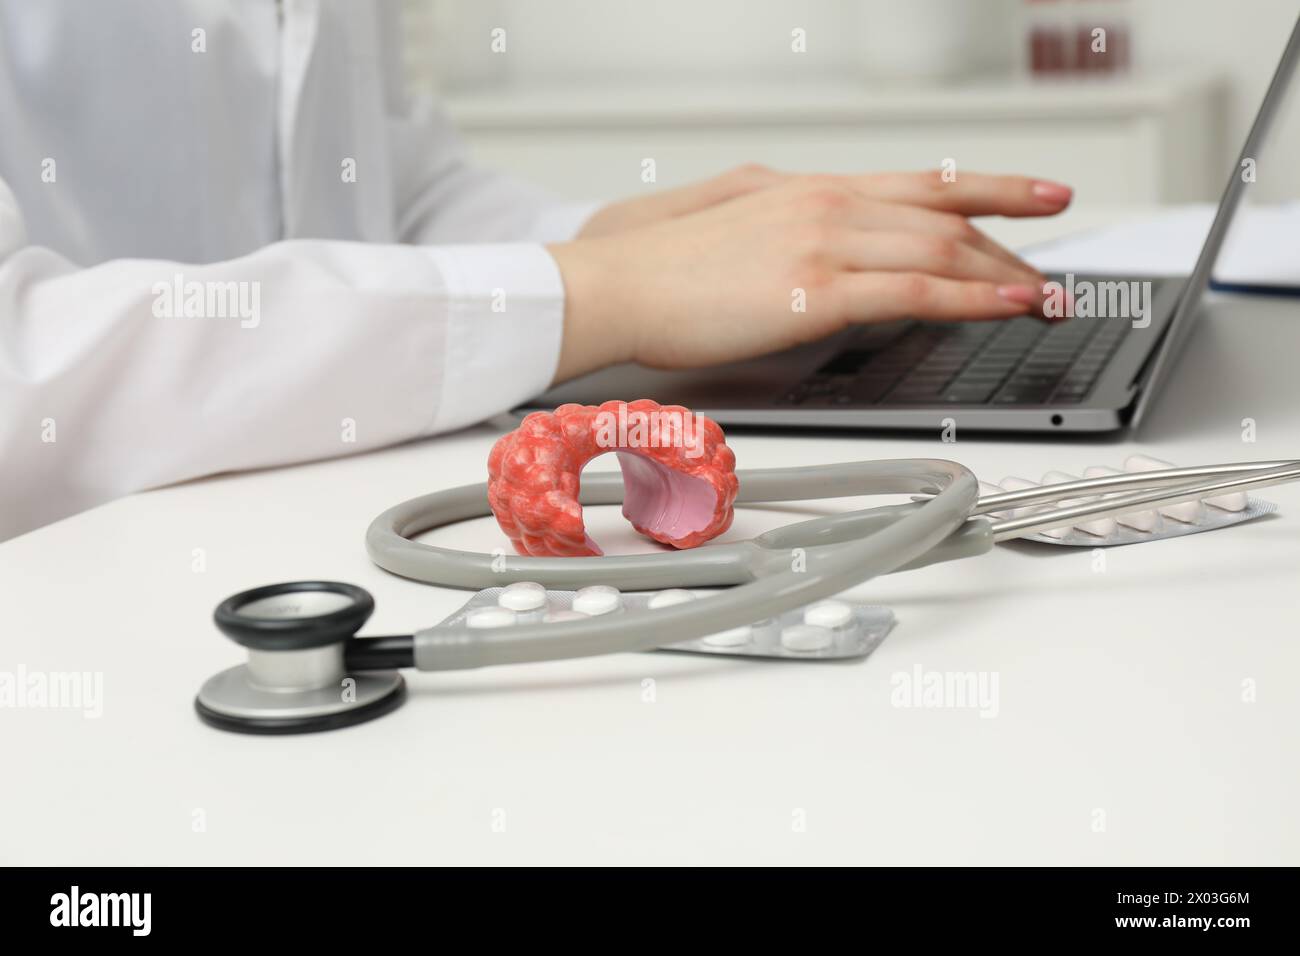 Endocrinologist working at table, focus on stethoscope and model of thyroid gland Stock Photo